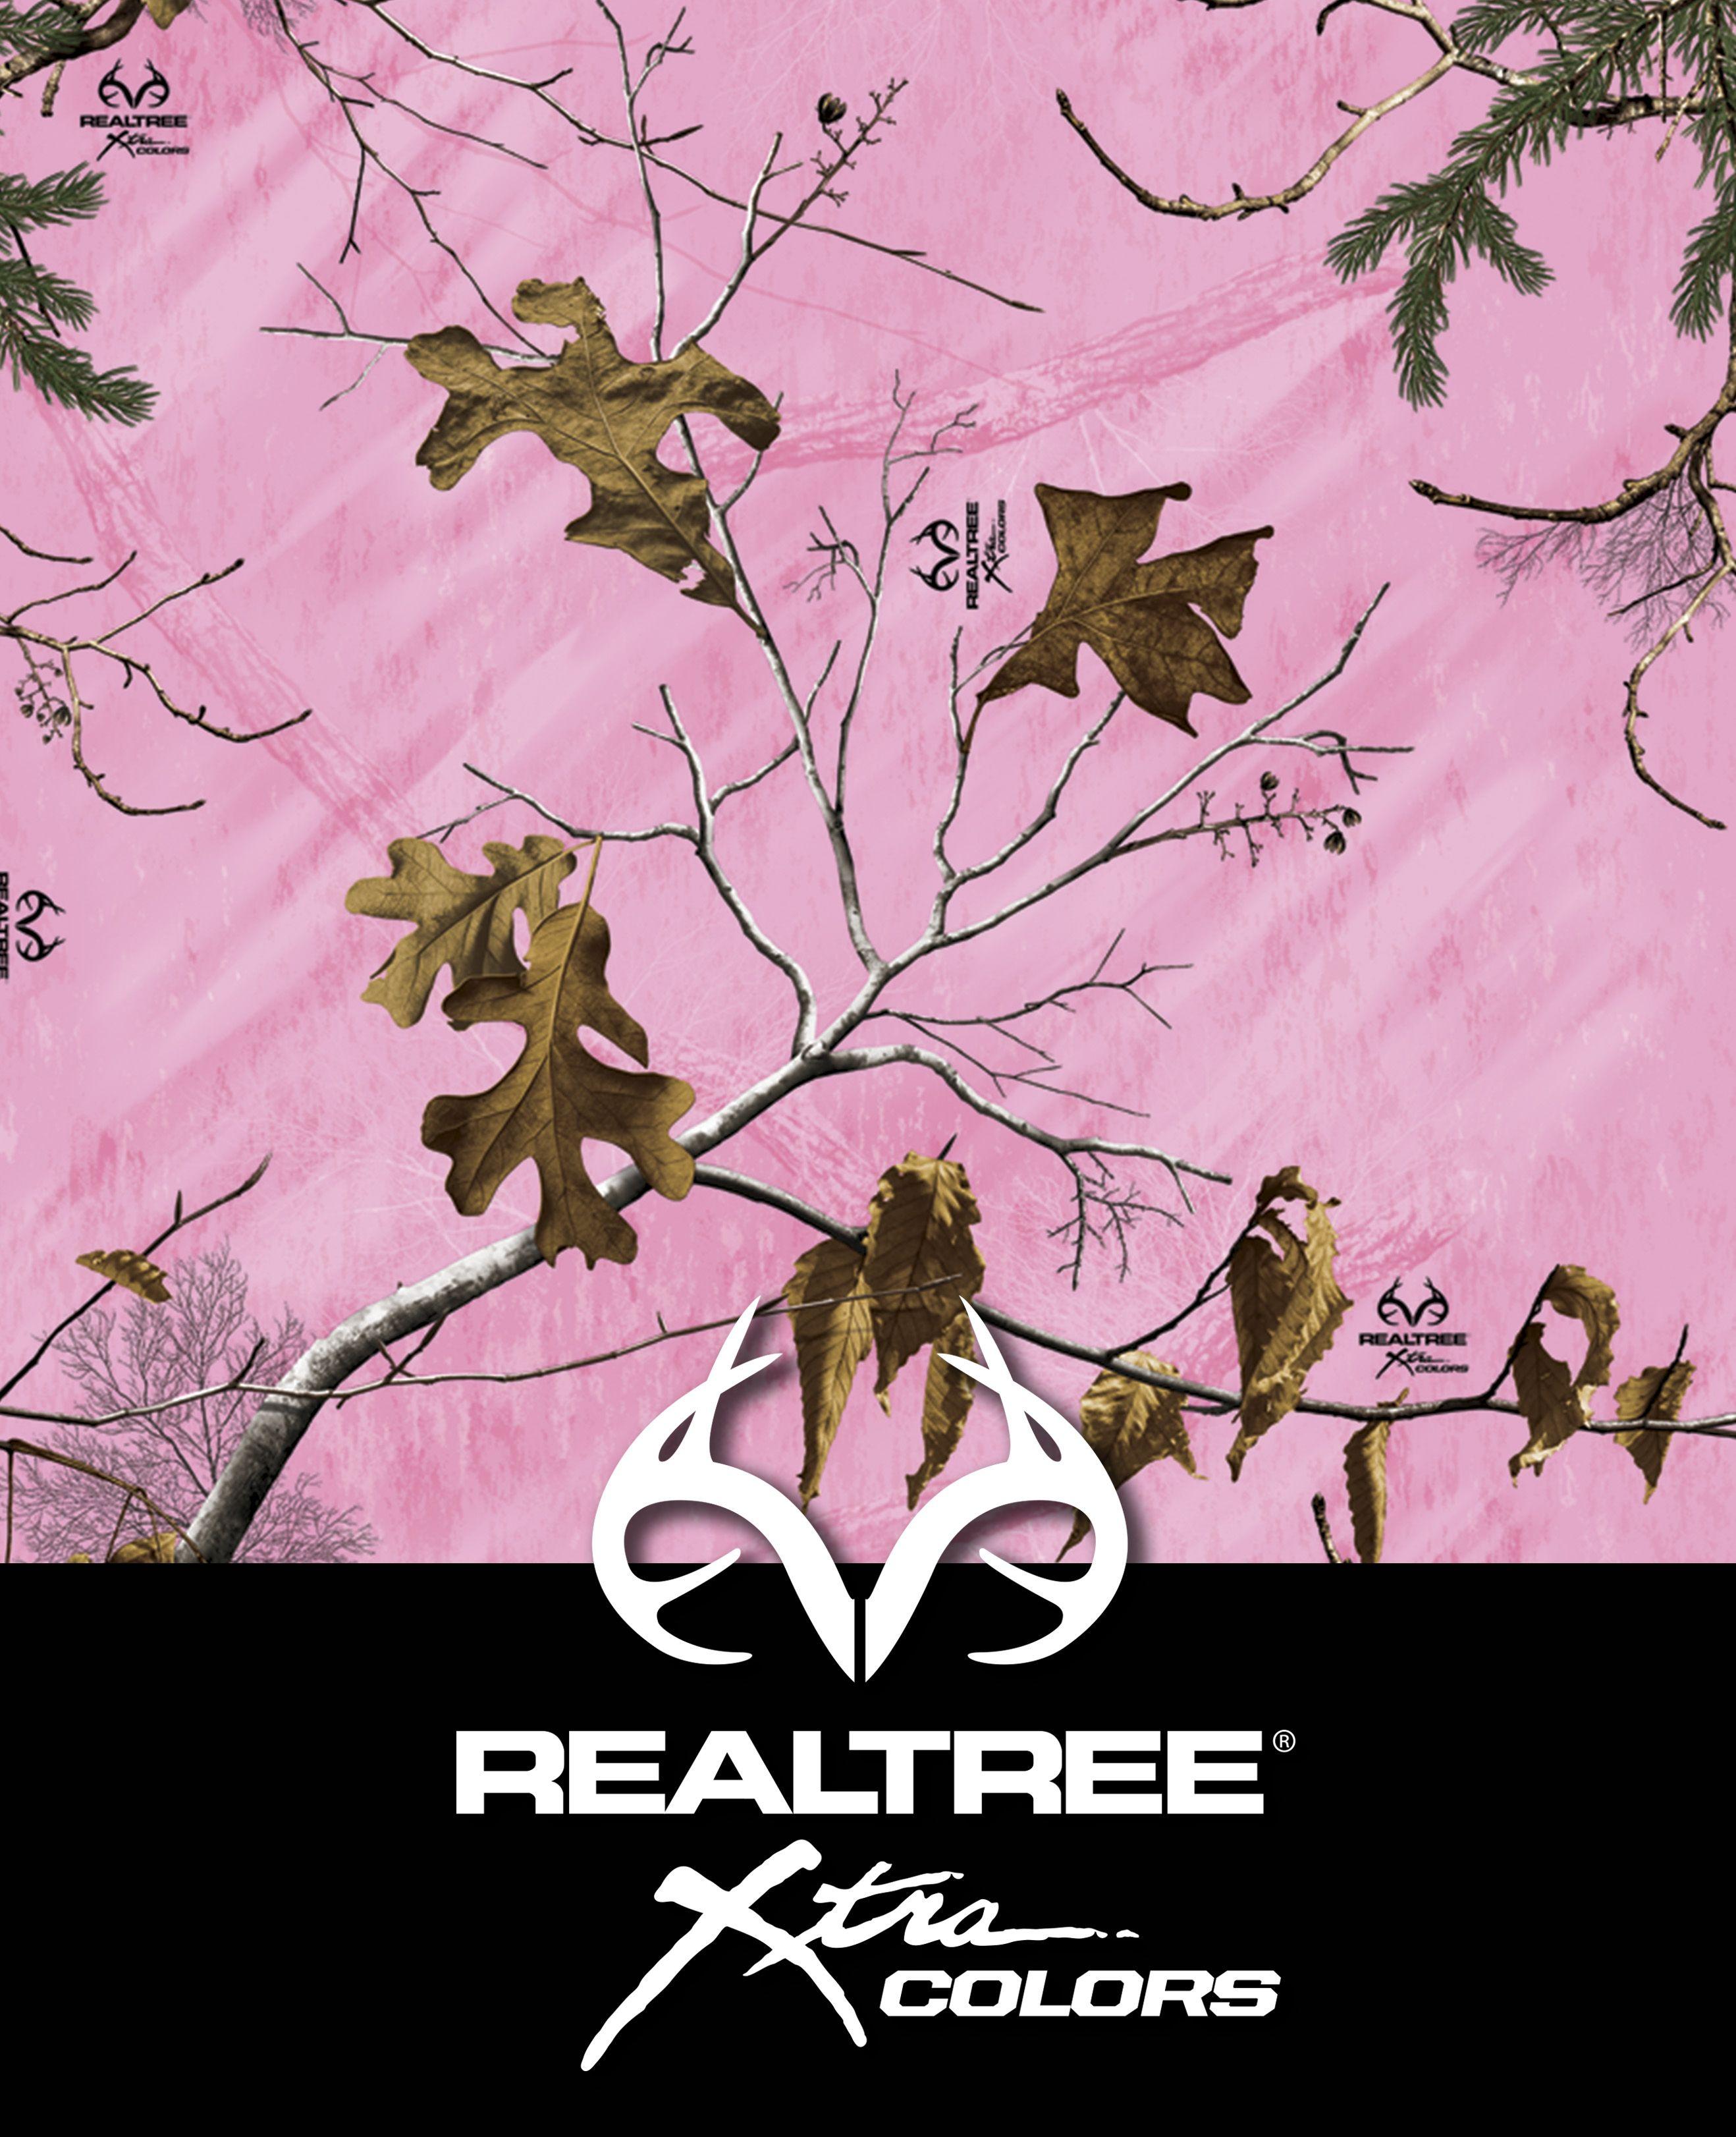 Camouflage Patterns. Realtree Camo Patterns, Decals. Camowraps®